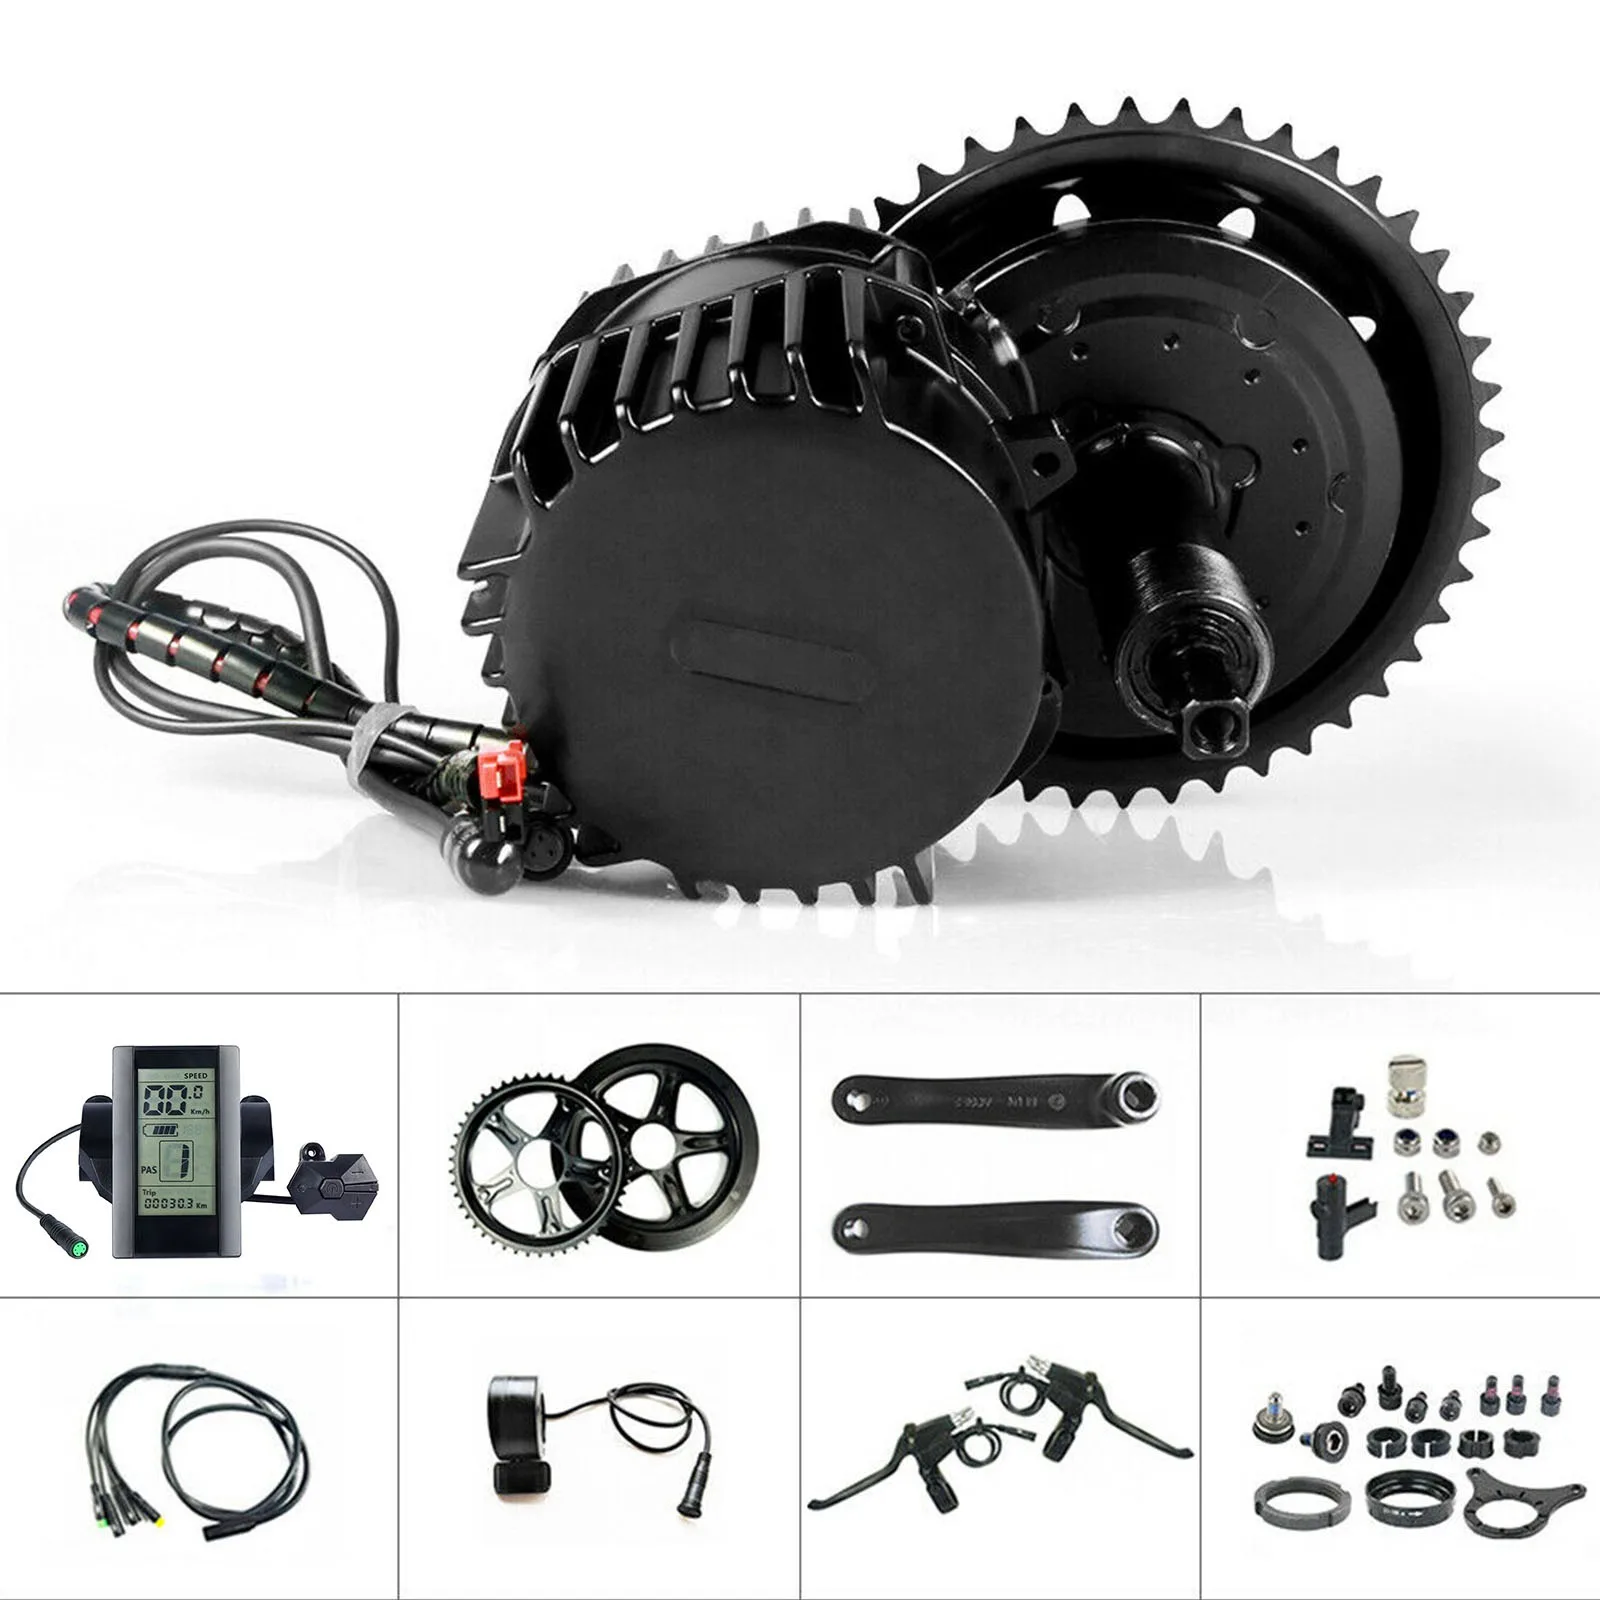 Motor Kit Electric Moped Accessories Modification Of Mountain Bike Aluminum Alloy